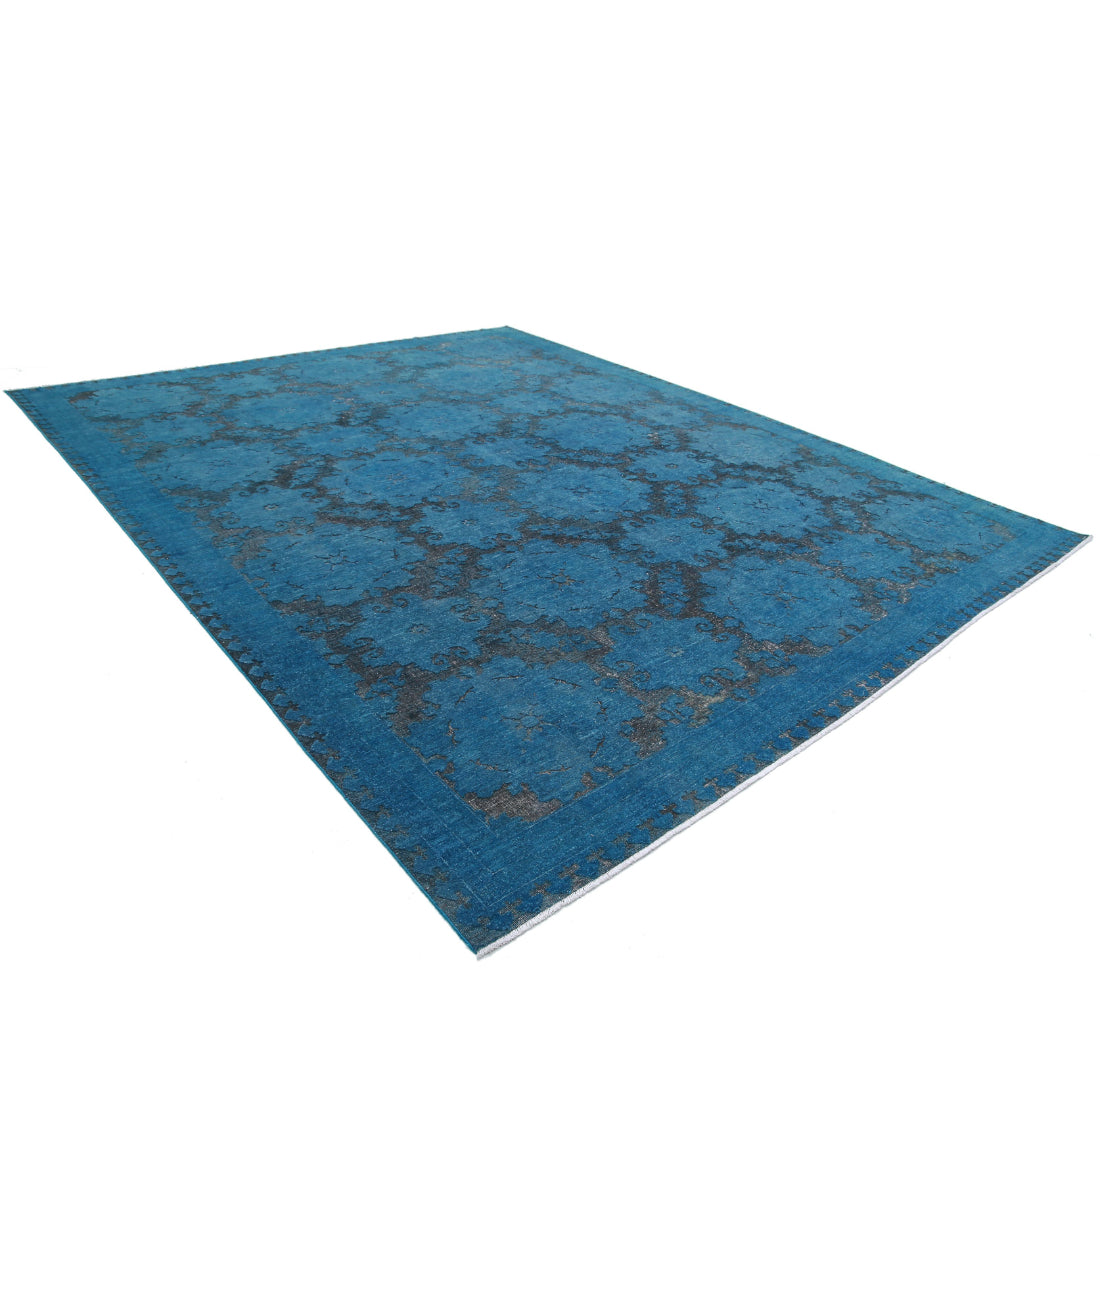 Hand Knotted Onyx Wool Rug - 11'10'' x 14'7'' 11'10'' x 14'7'' (355 X 438) / Blue / Blue